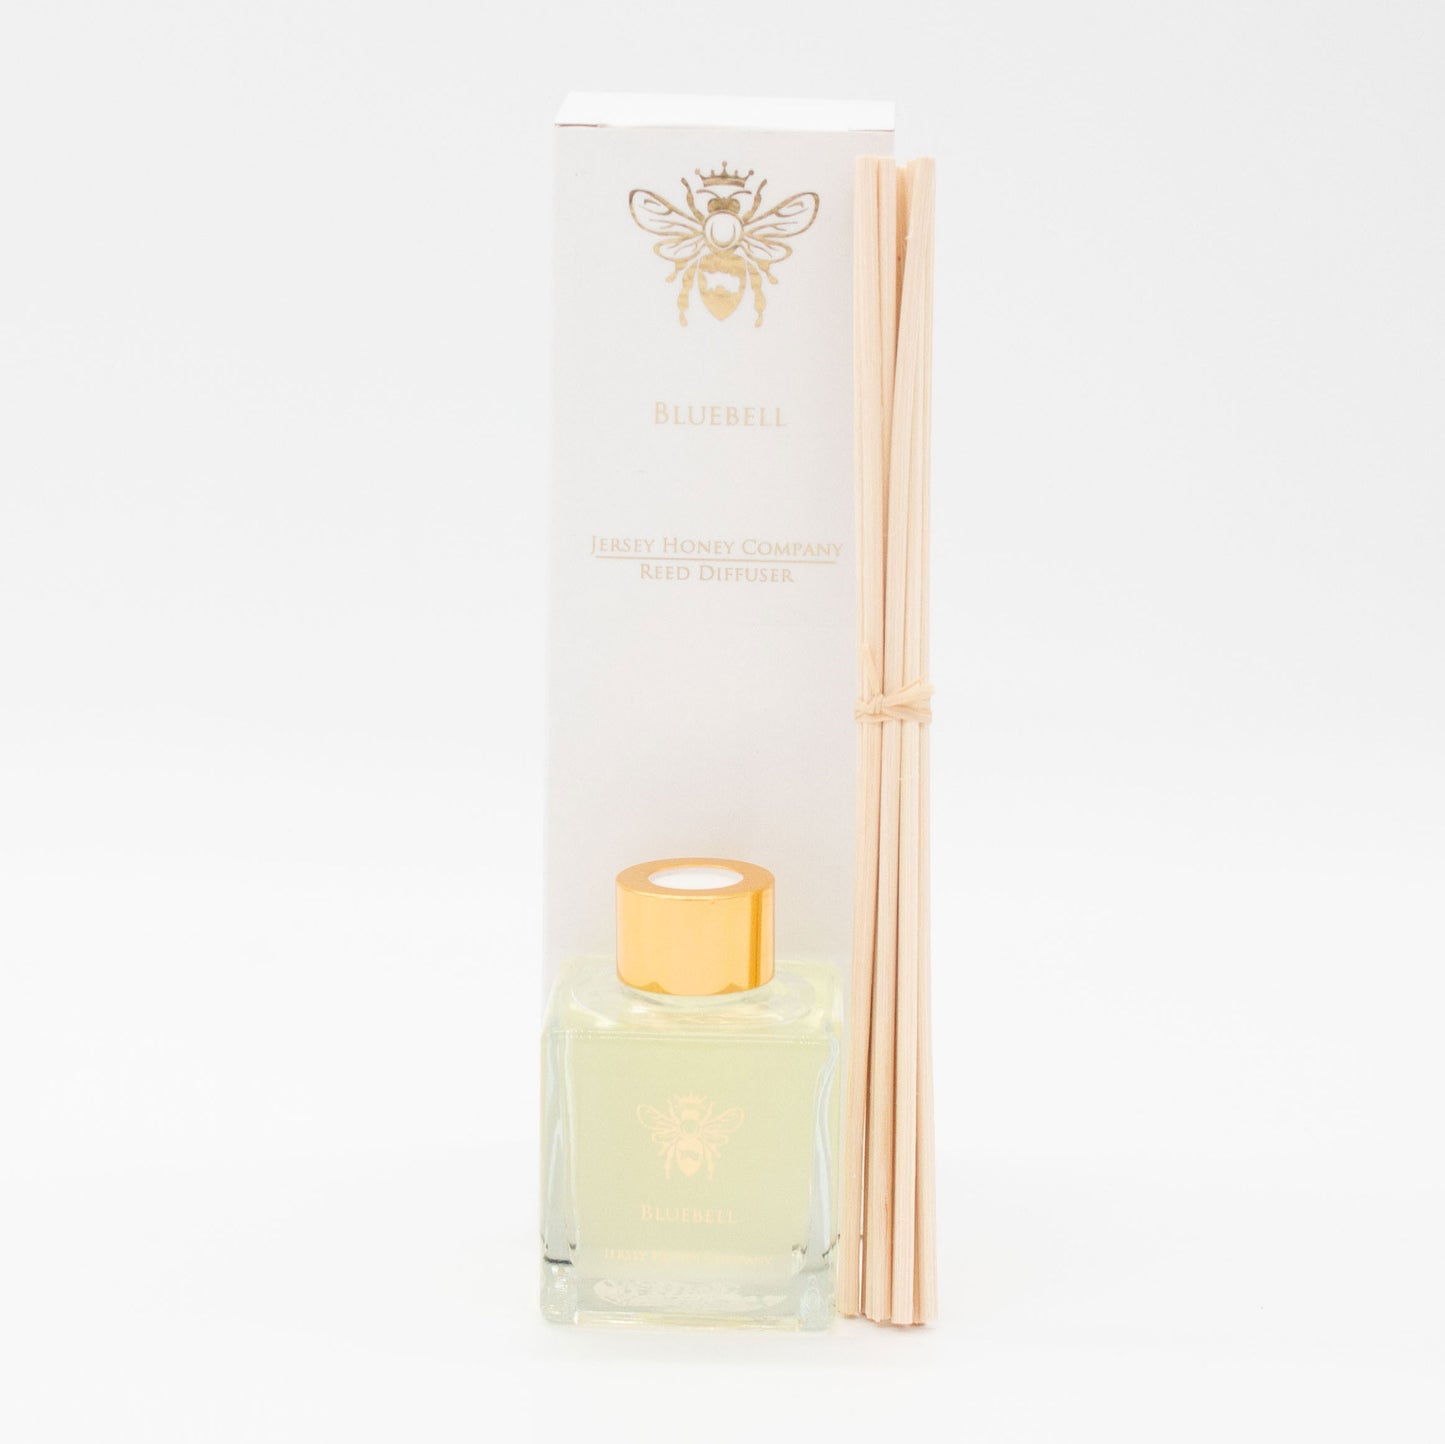 Jersey Honey Diffusers at Maison de Jersey